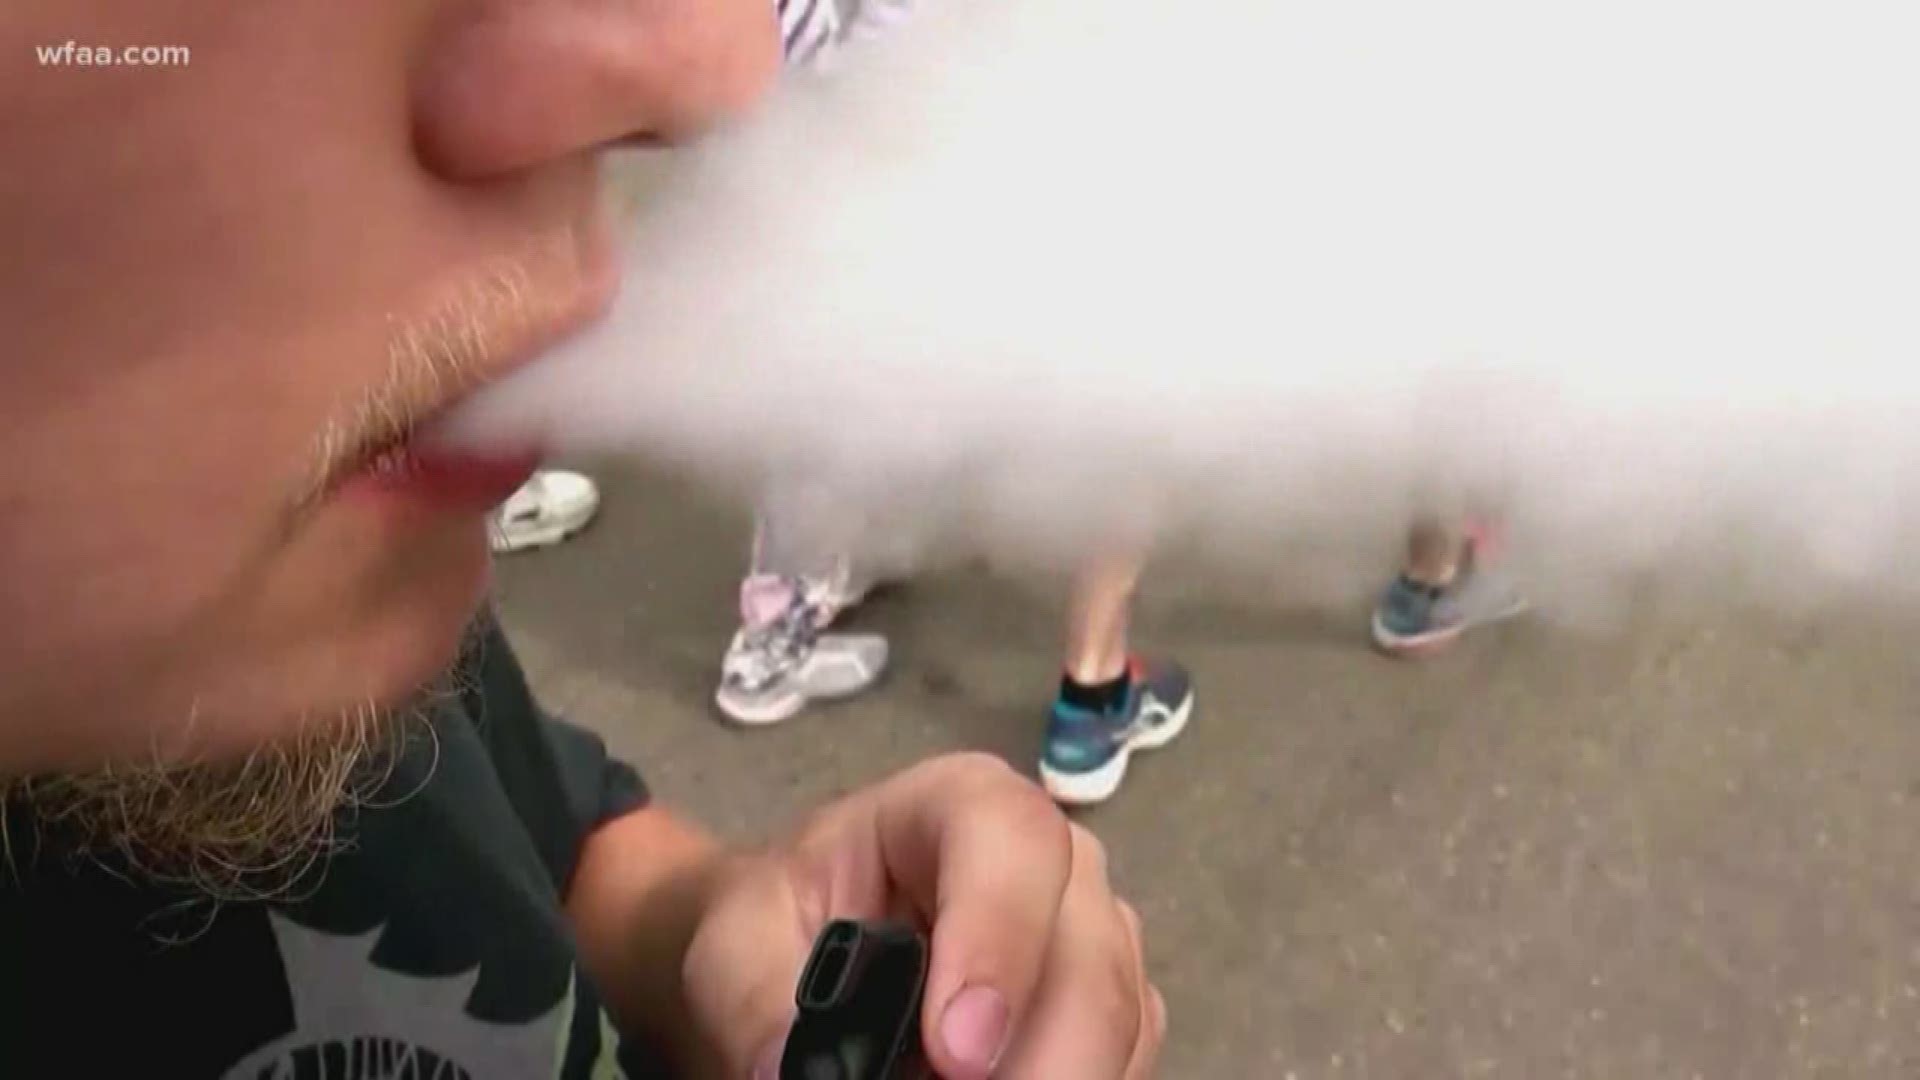 A teen in Texas is the latest person to experience health problems that may be linked to vaping, according to health officials. A spokesperson for the Texas Health Department confirmed this week that a teen had lung disease after vaping.